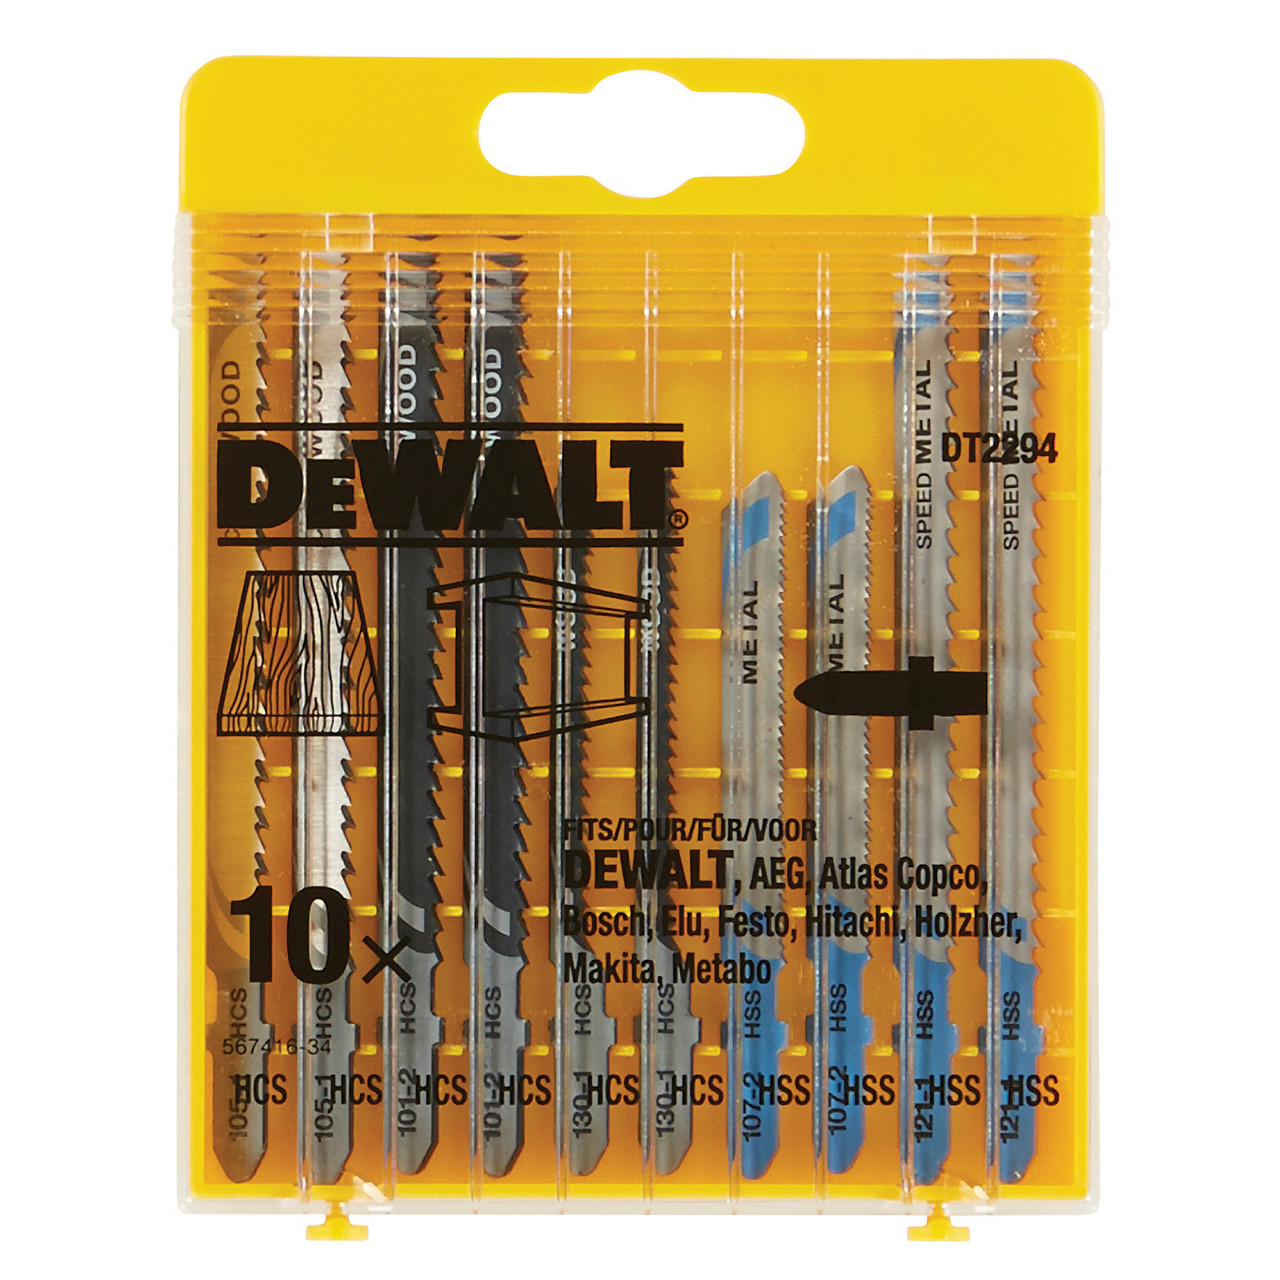 Photos - Electric Jigsaw DeWALT DT2294 XPC Jigsaw Blade Set for Wood and Metal  DT2294-QZ (10 Pack)